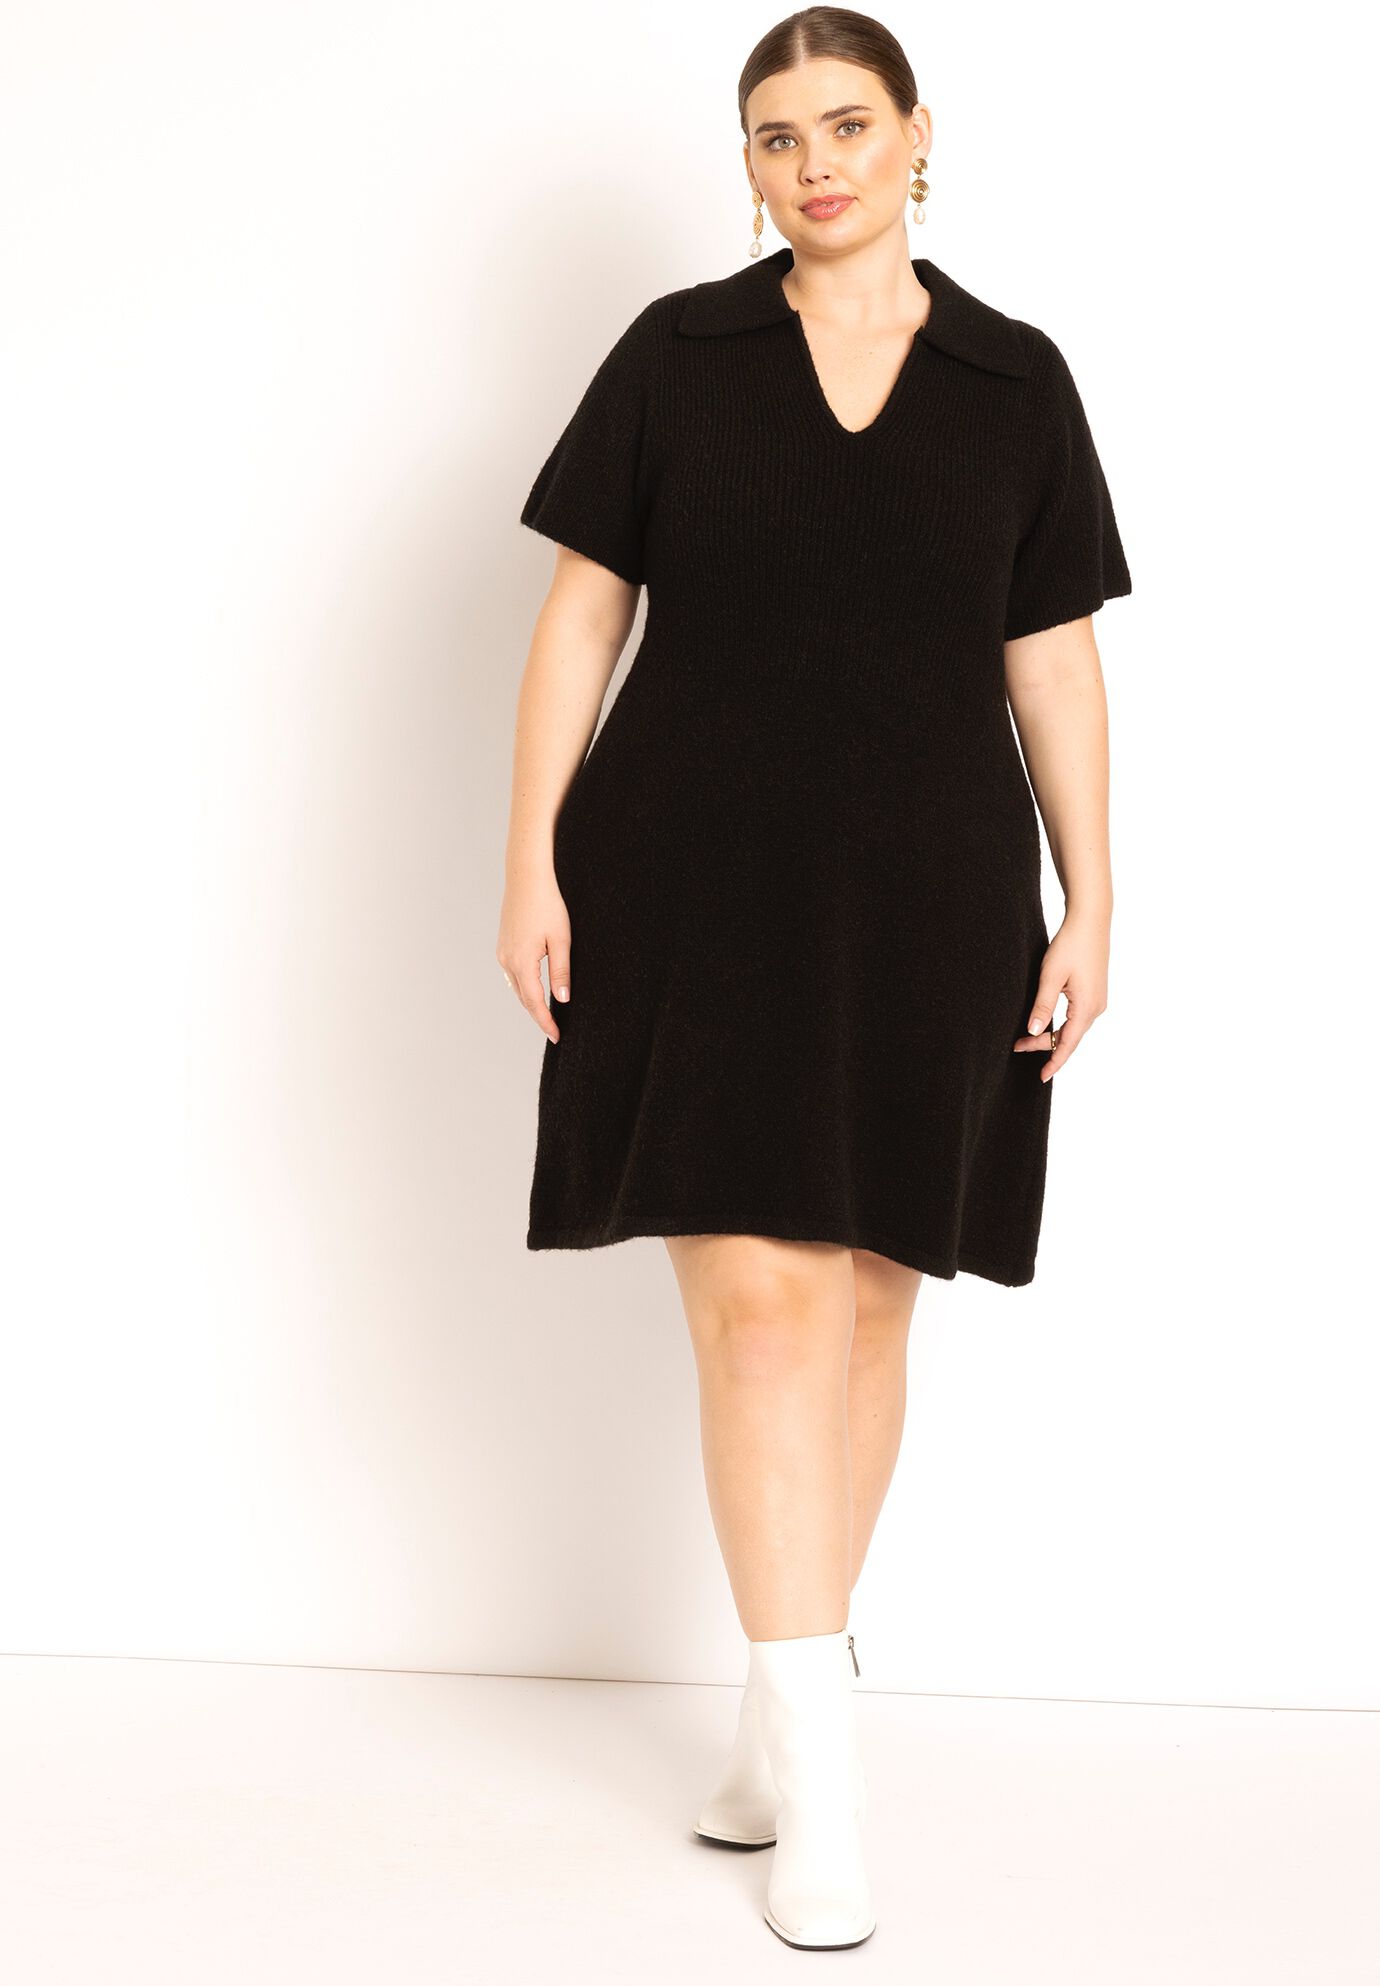 Plus Size Sweater Collared Short Dress